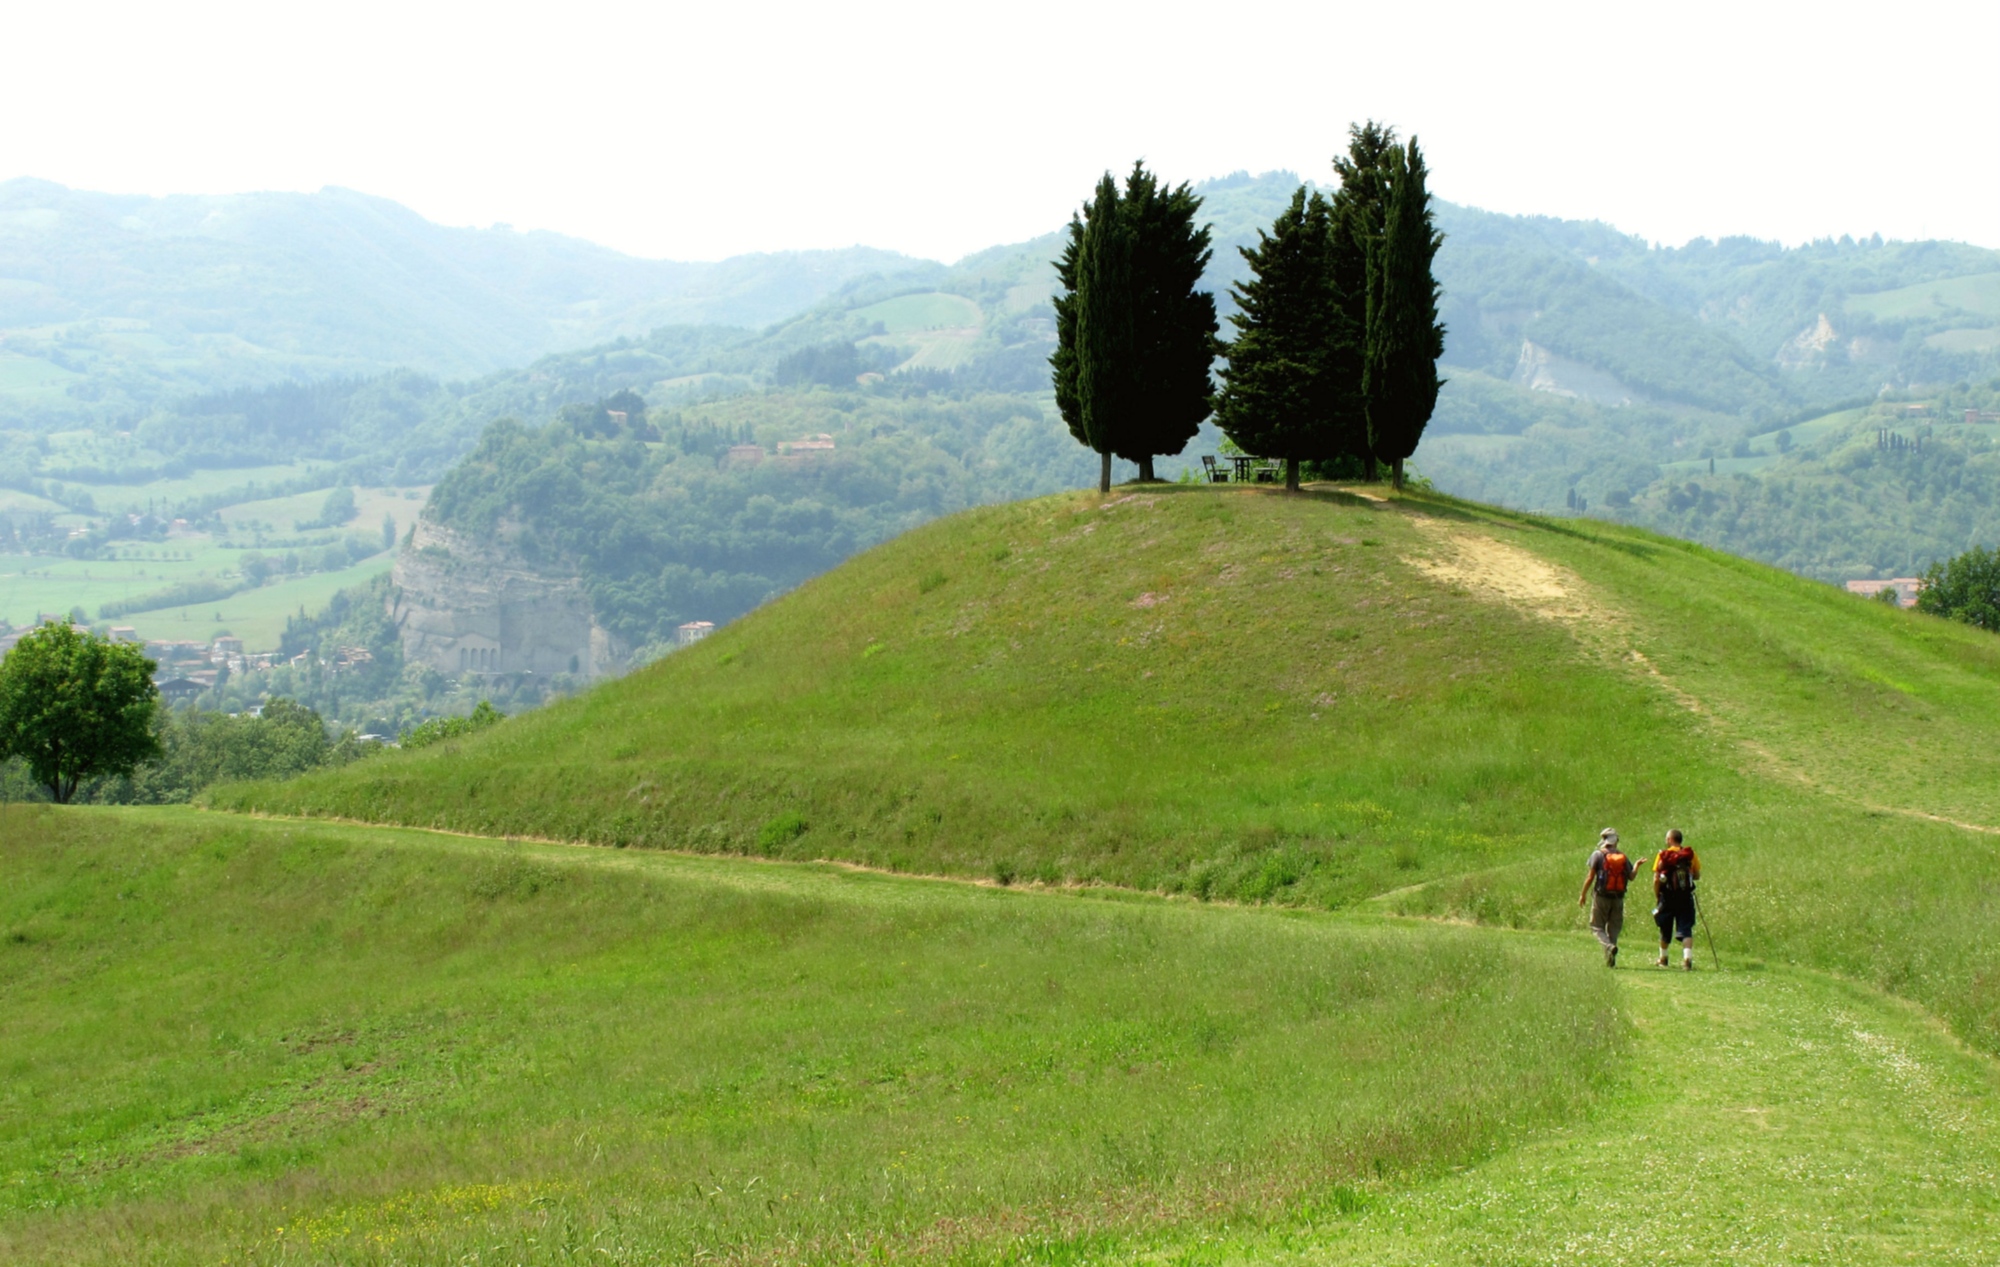 A 7-day tour of the Apennines to Florence